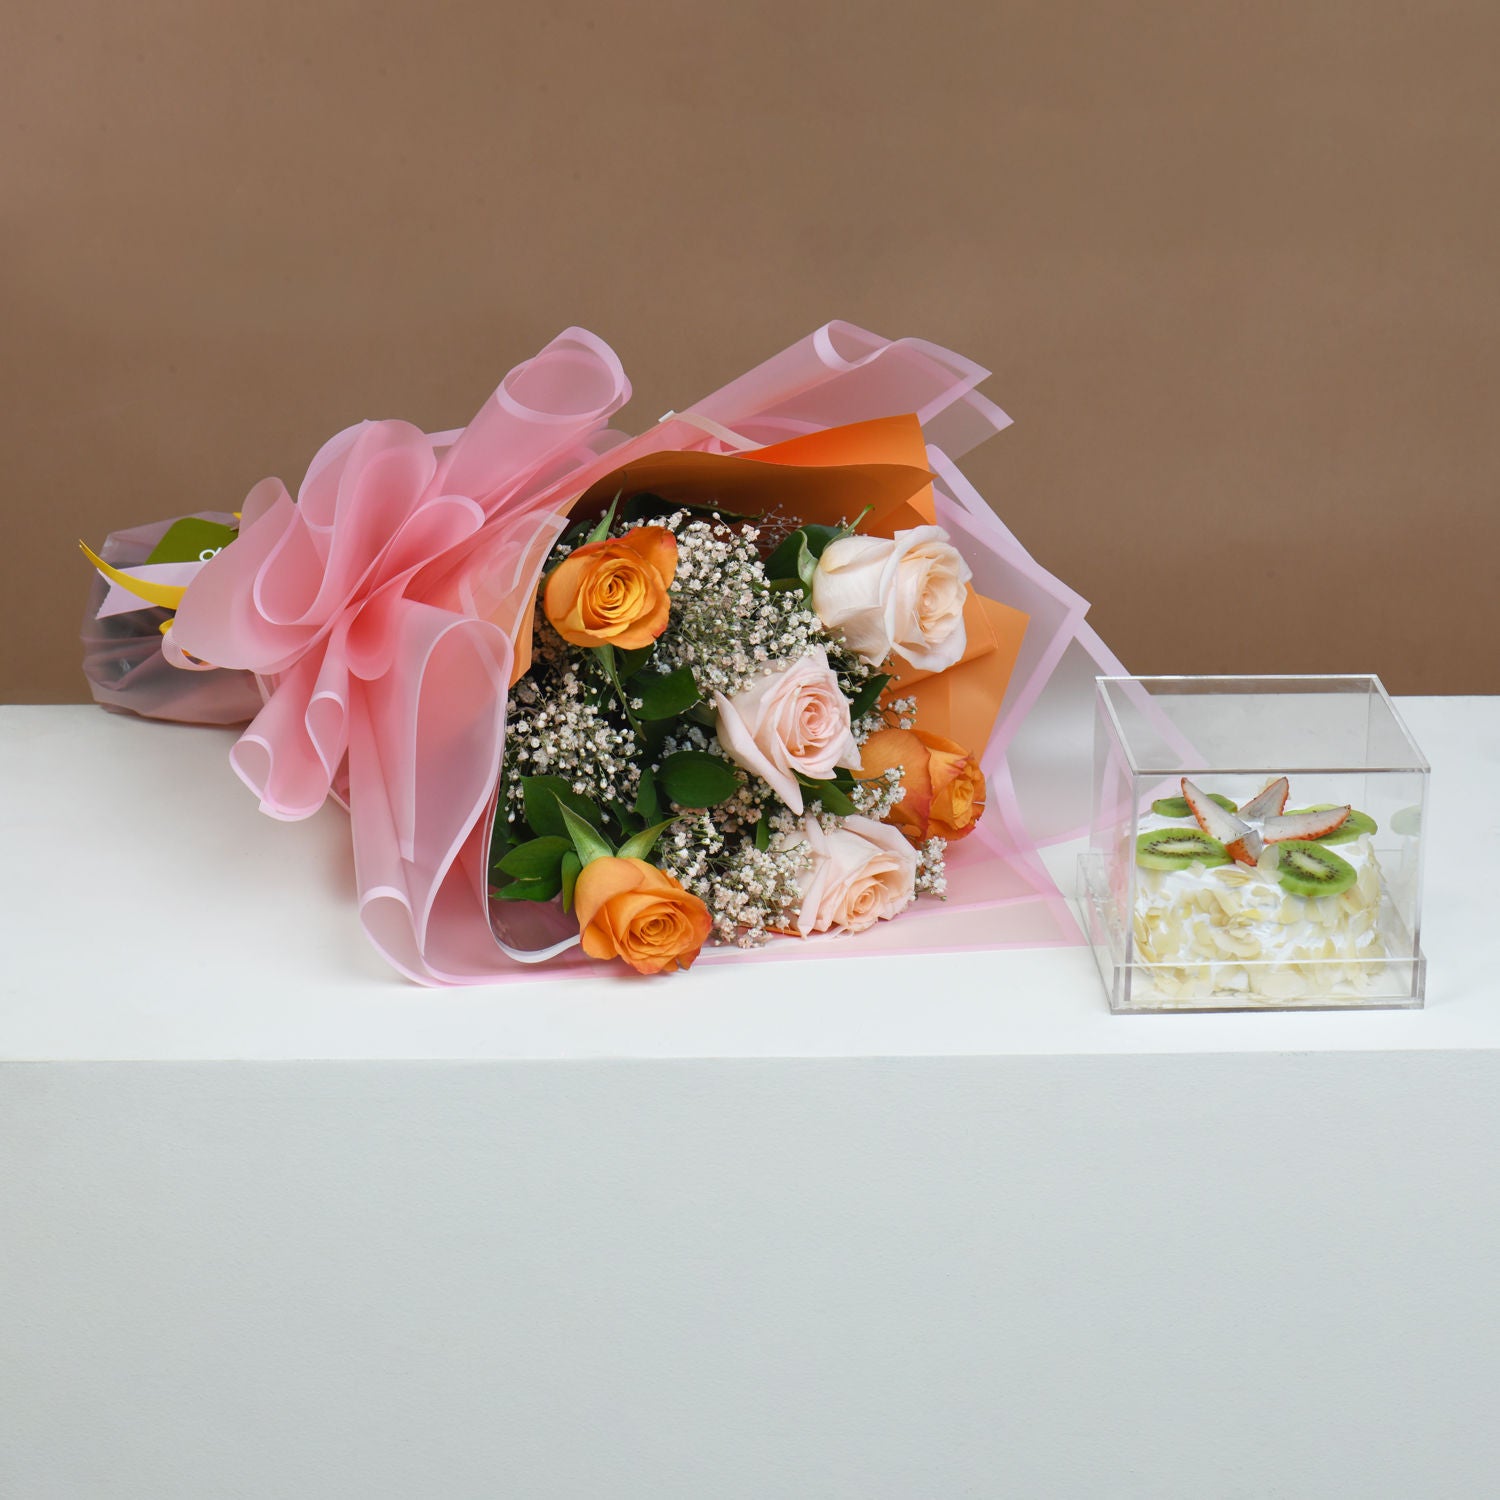 Beautiful Roses Bouquet with Fruit Cake